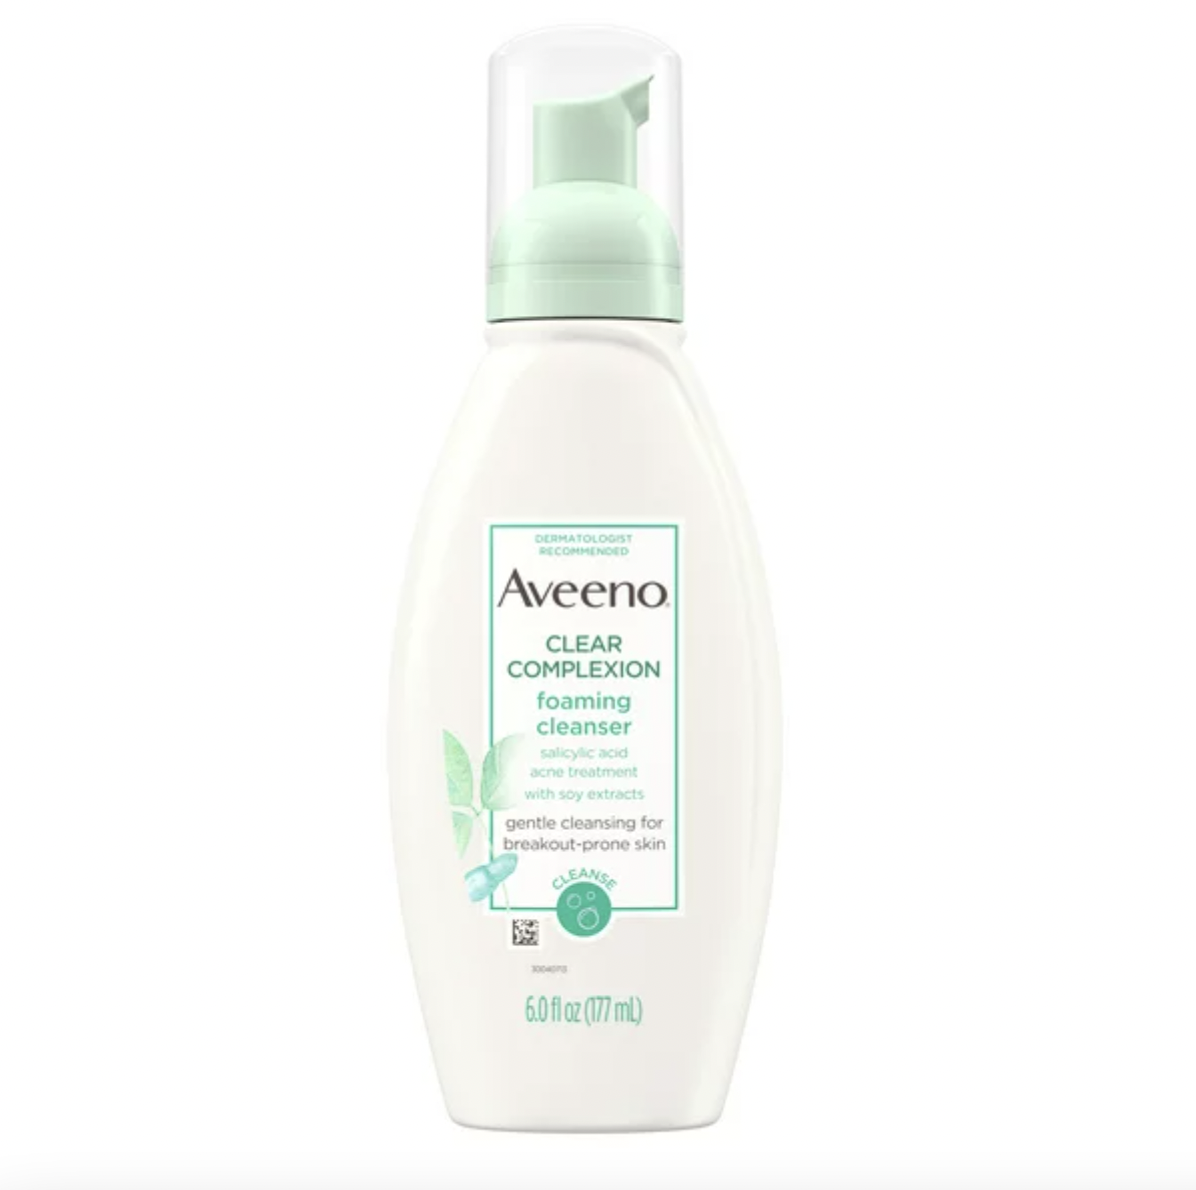 Aveeno Clear Complexion Foaming Facial Cleanser, Oil-Free, 6 fluid ounces